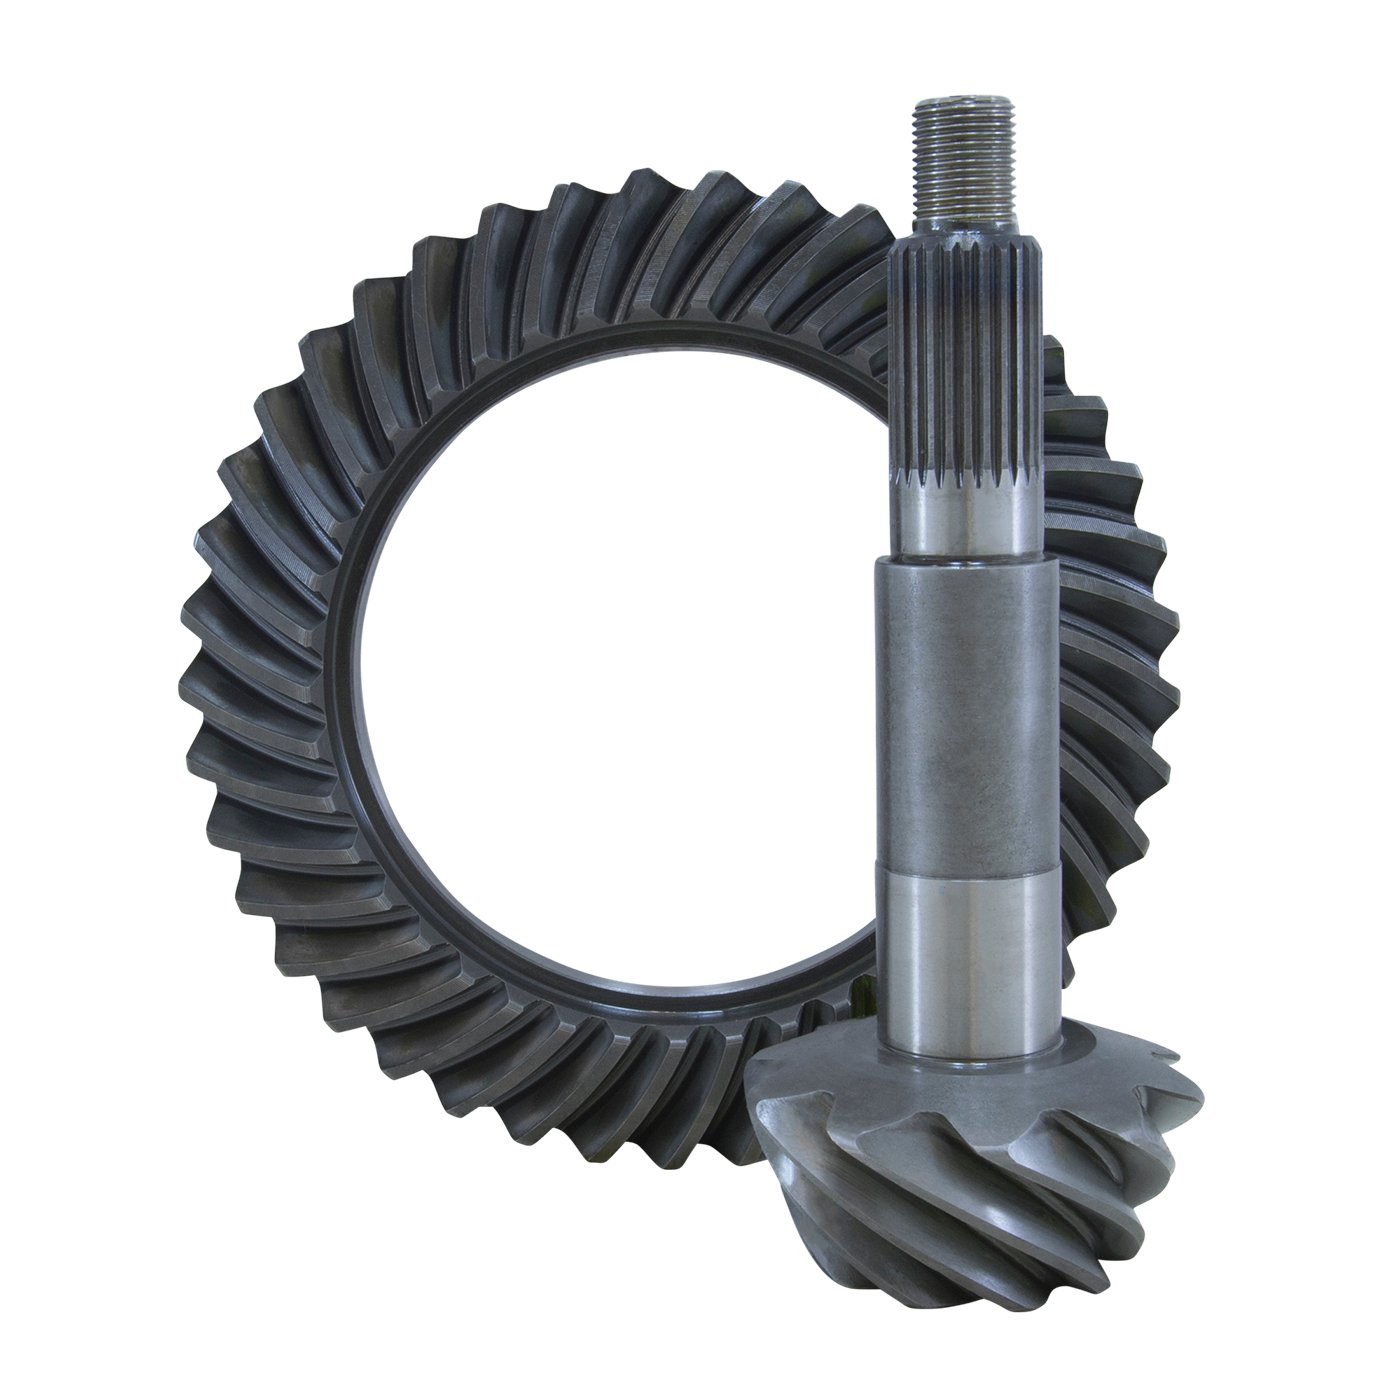 USA Standard ZG D44-538 Replacement Ring & Pinion Gear Set, For Dana 44, 5.38 Ratio